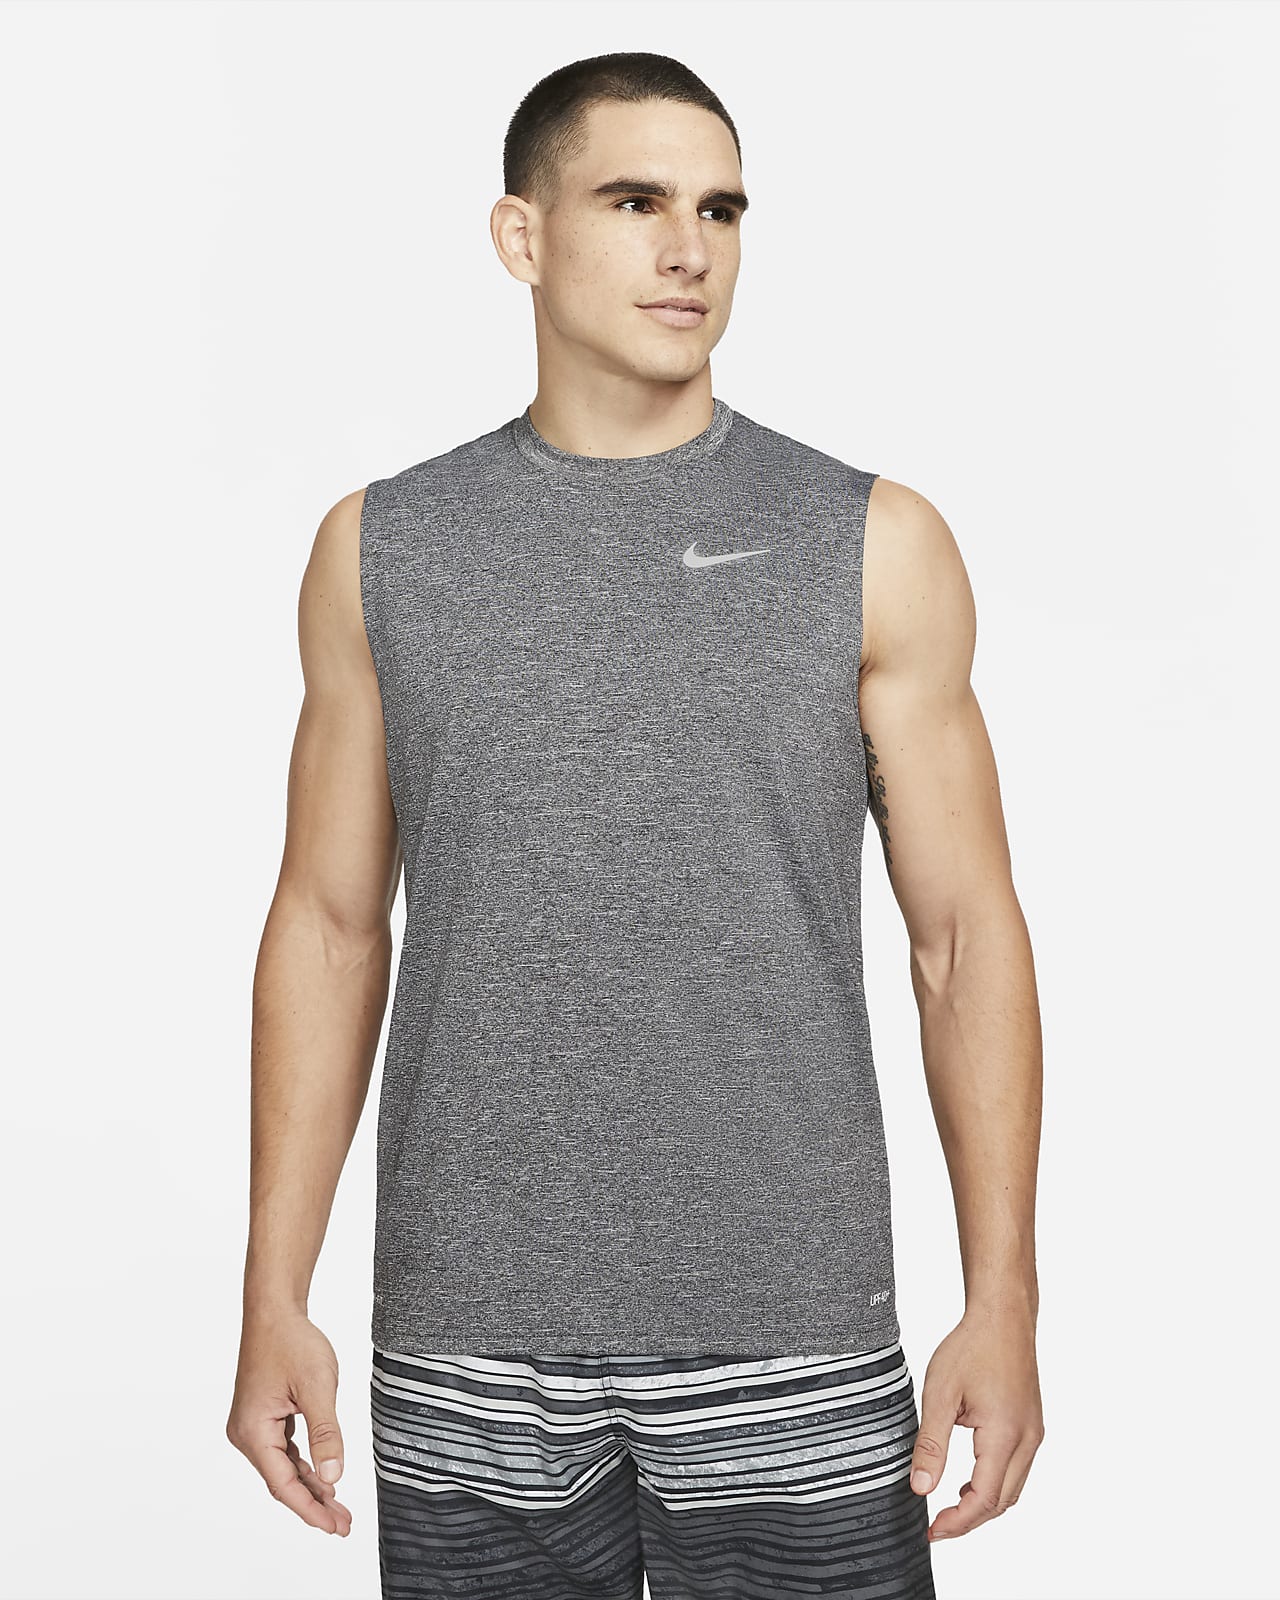 Nike Heather Sleeveless Hydroguard | peacecommission.kdsg.gov.ng